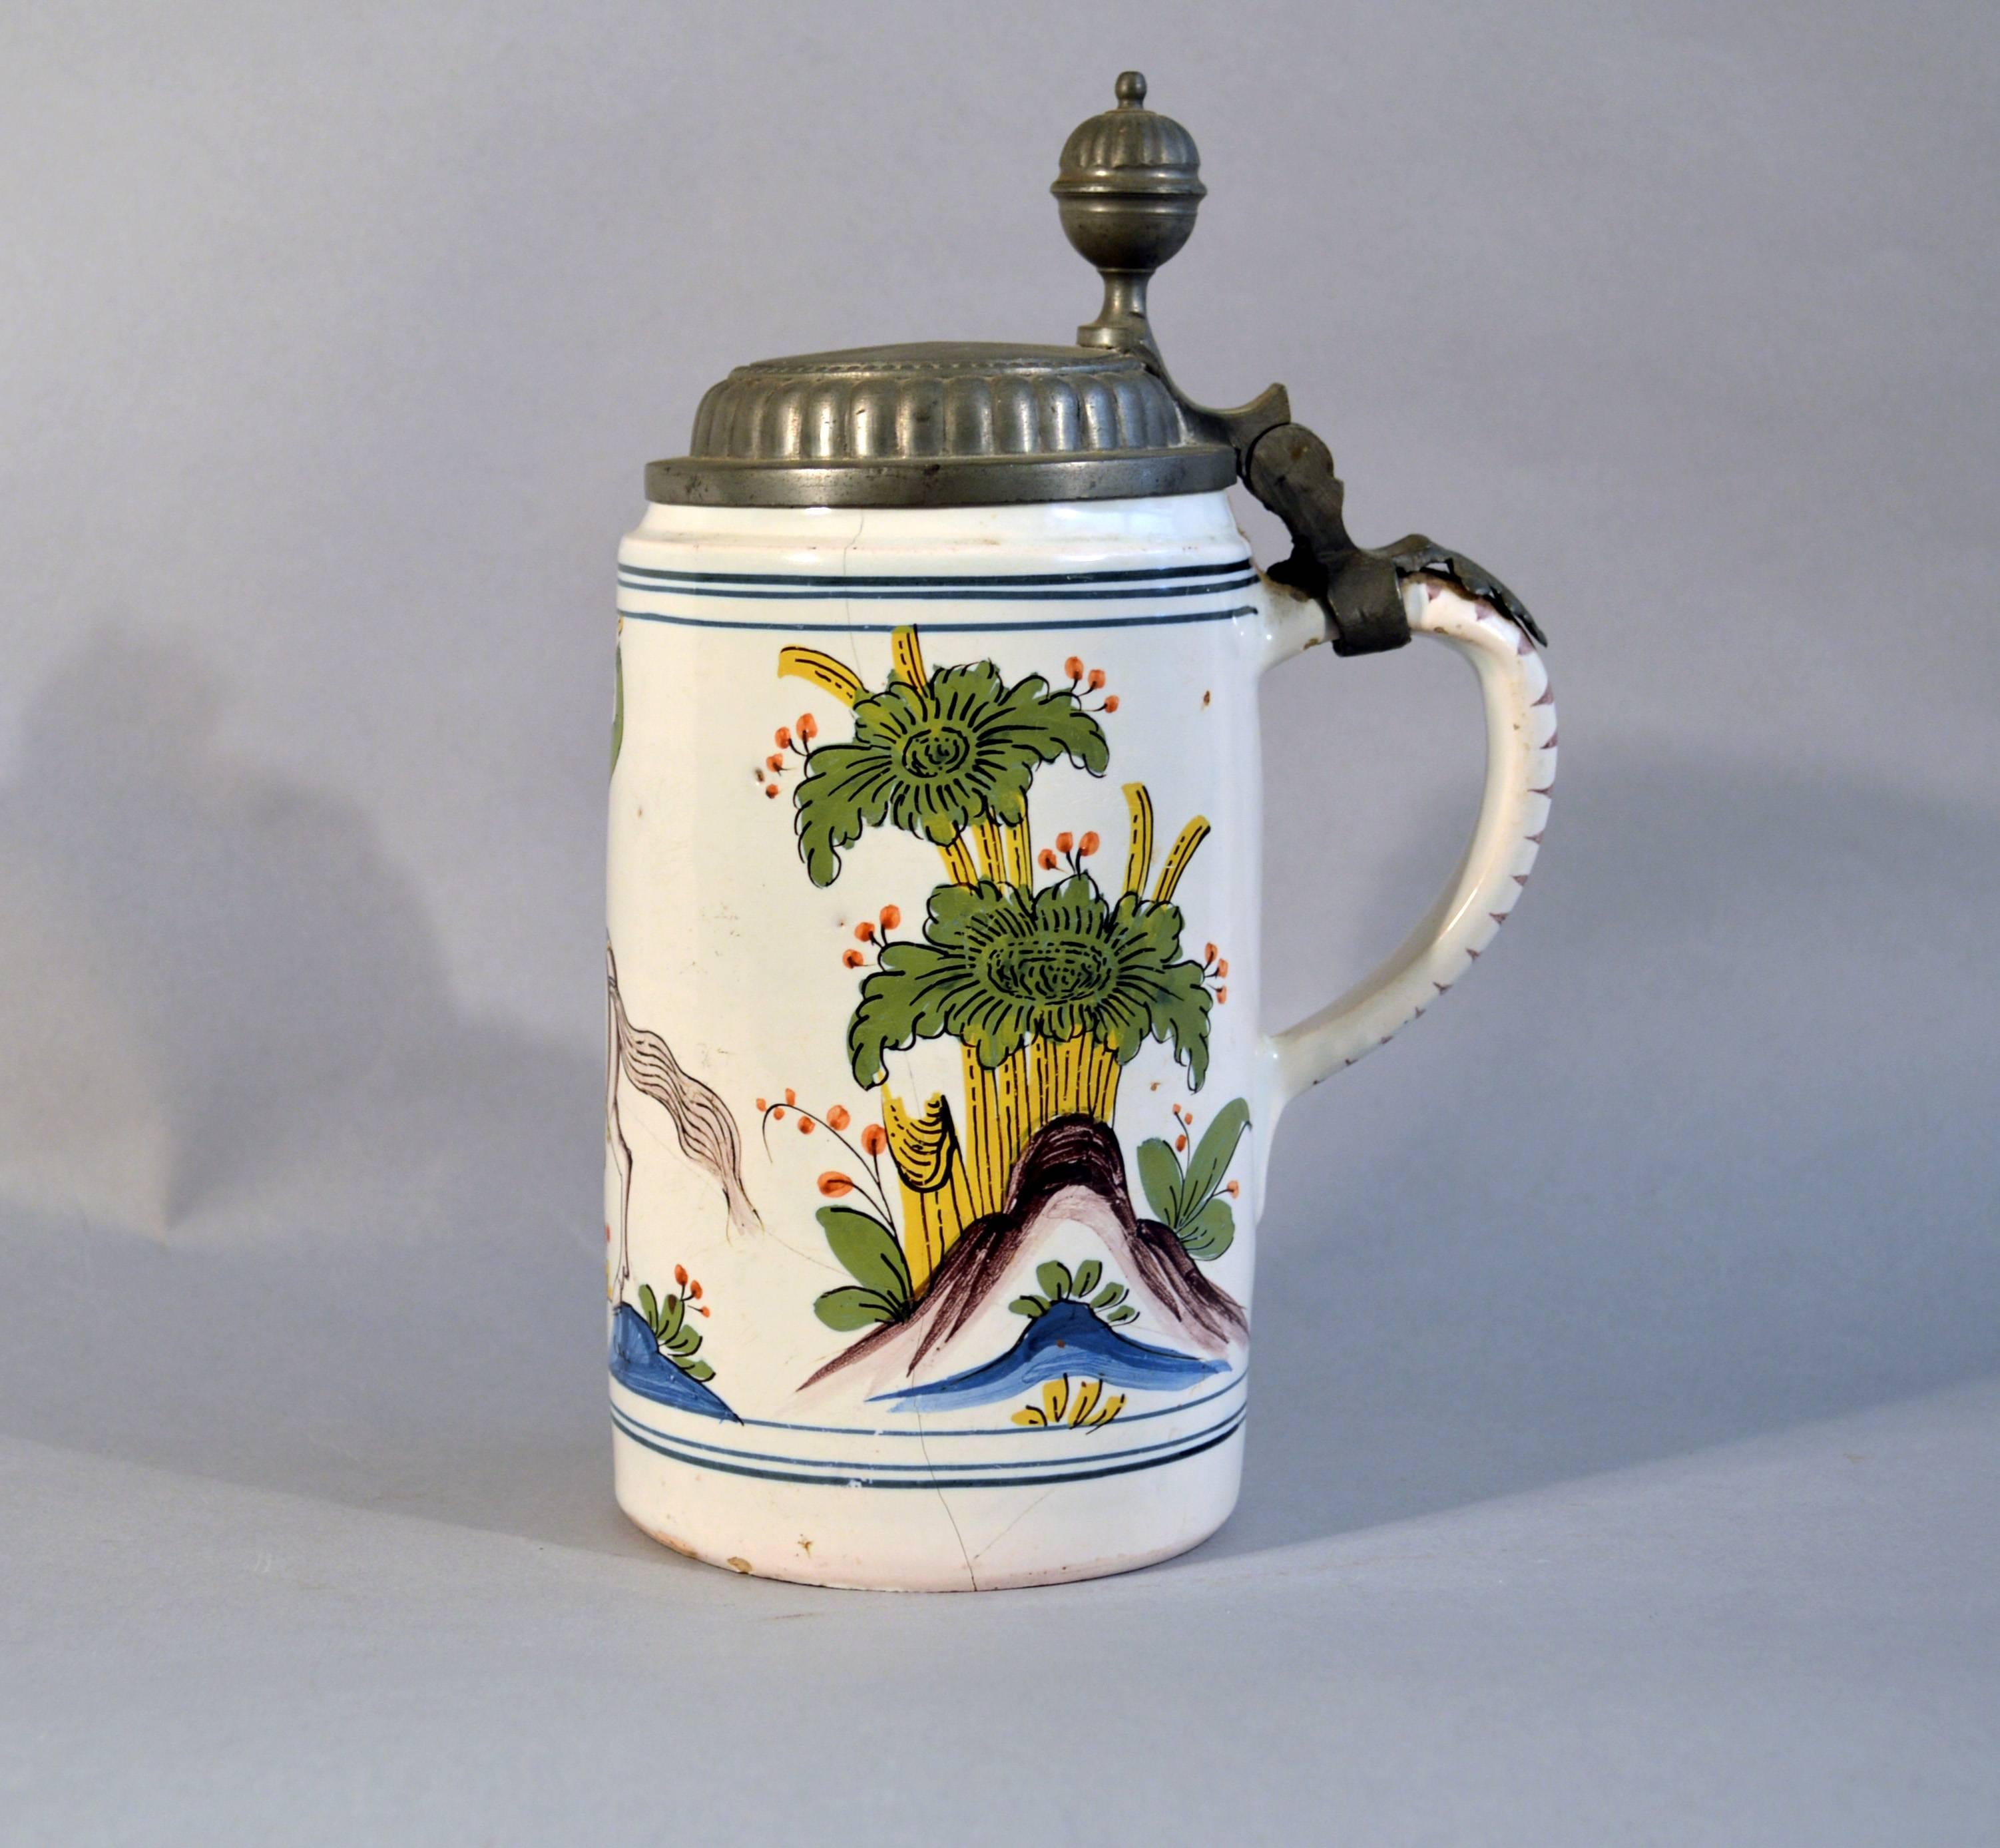 German Faience 'Tin-Glazed Earthenware' Pewter-Mounted Tankard, Thuringia In Good Condition For Sale In Downingtown, PA